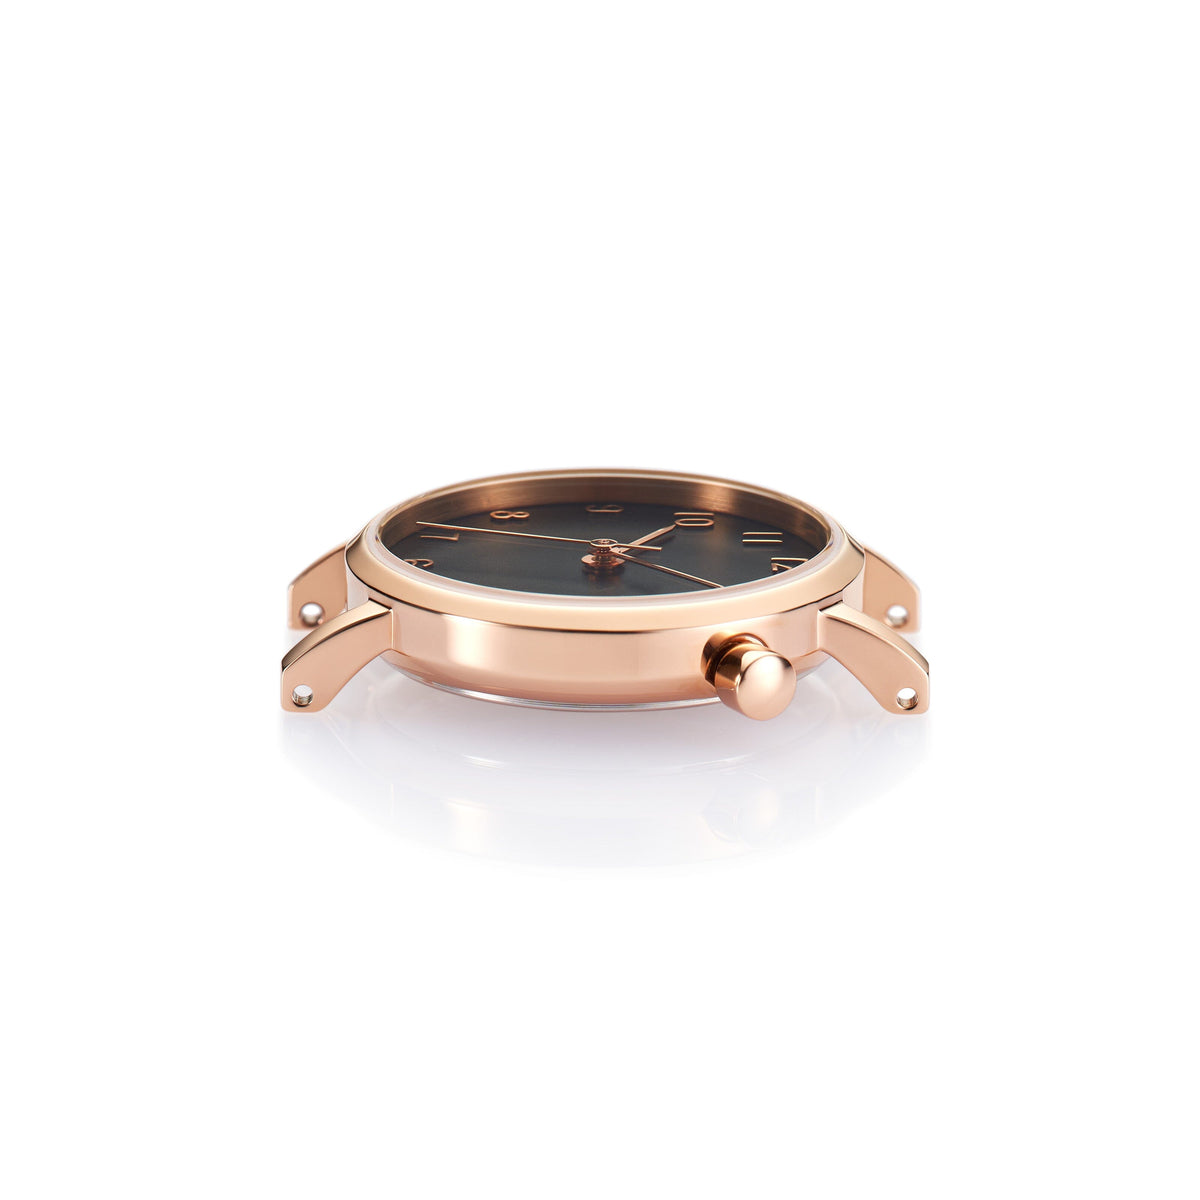 The Black and Rose Gold Watch -  Butterflies (Kids)